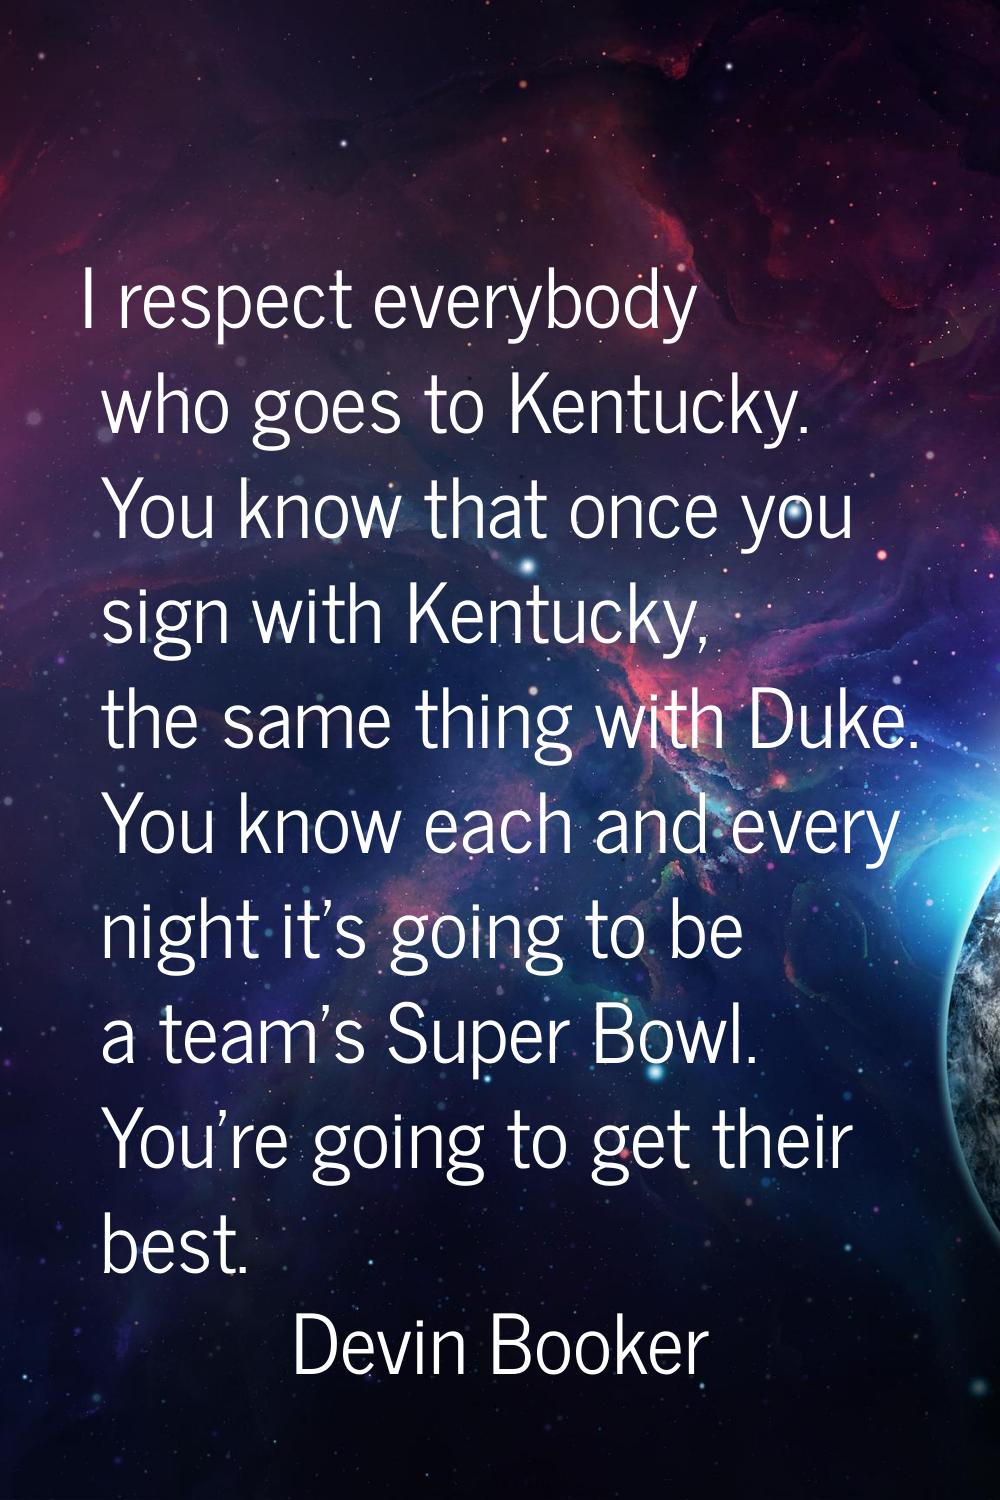 I respect everybody who goes to Kentucky. You know that once you sign with Kentucky, the same thing